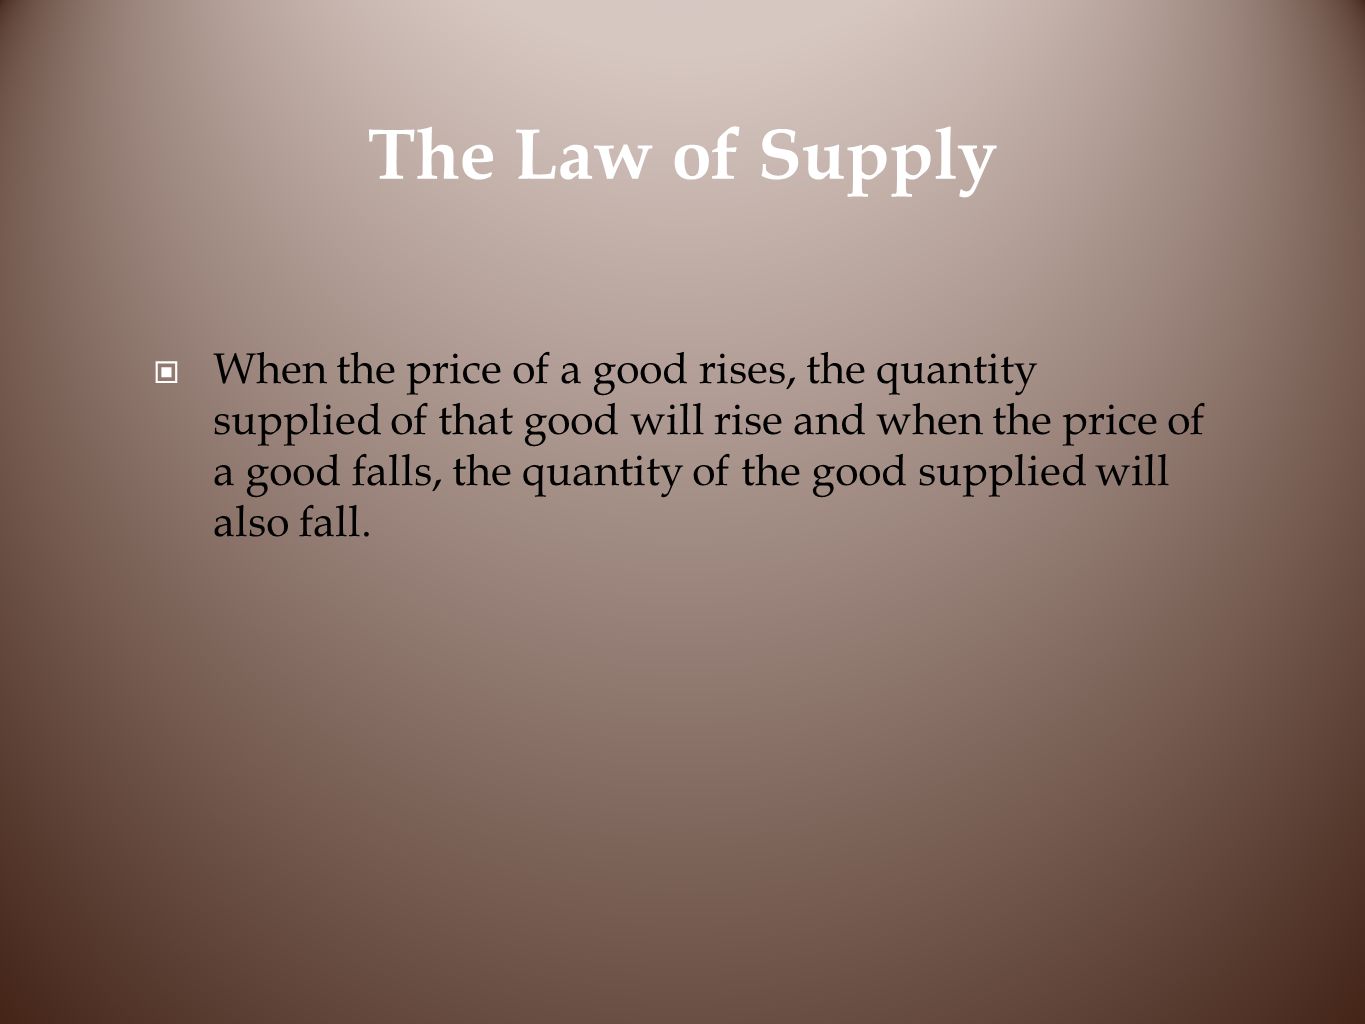 The Law of Supply When the price of a good rises, the quantity supplied of that good will rise and when the price of a good falls, the quantity of the good supplied will also fall.